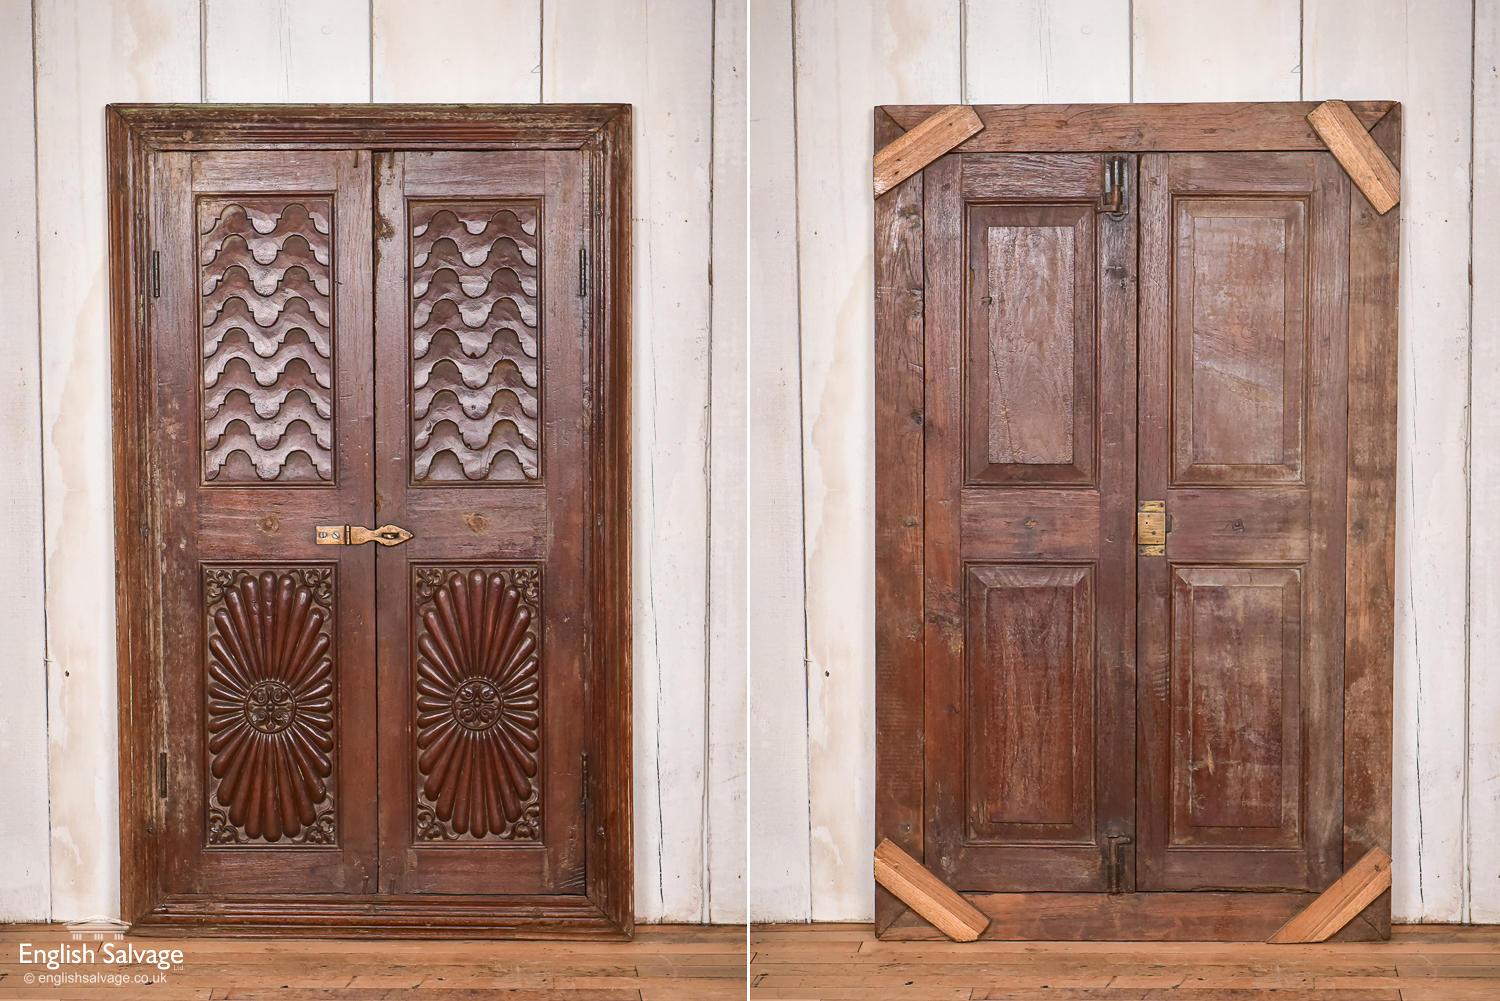 Lovely set of three antique carved teak wood window shutters, or could be used as cabinet or cupboard fronts. The shutters come in a moulded frame, with brass hinges and hardware. The front of the panels are carved at the top with a pattern